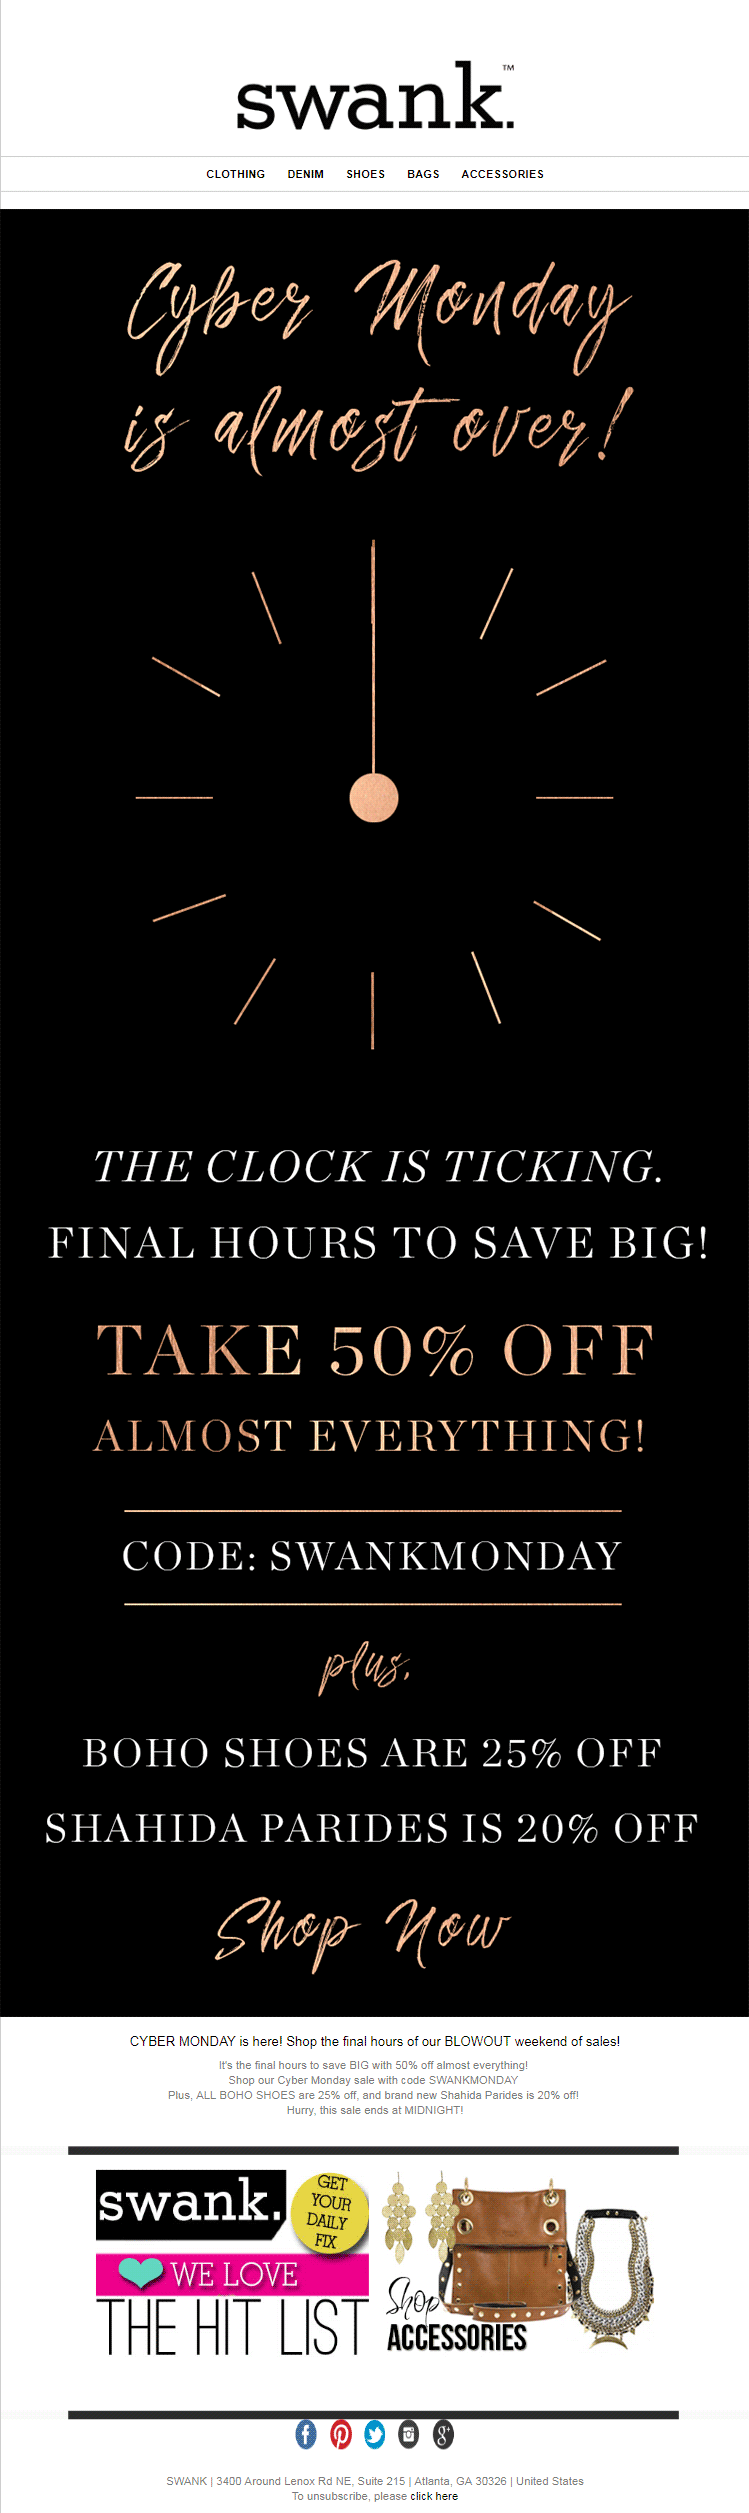 Swank_cyber monday email